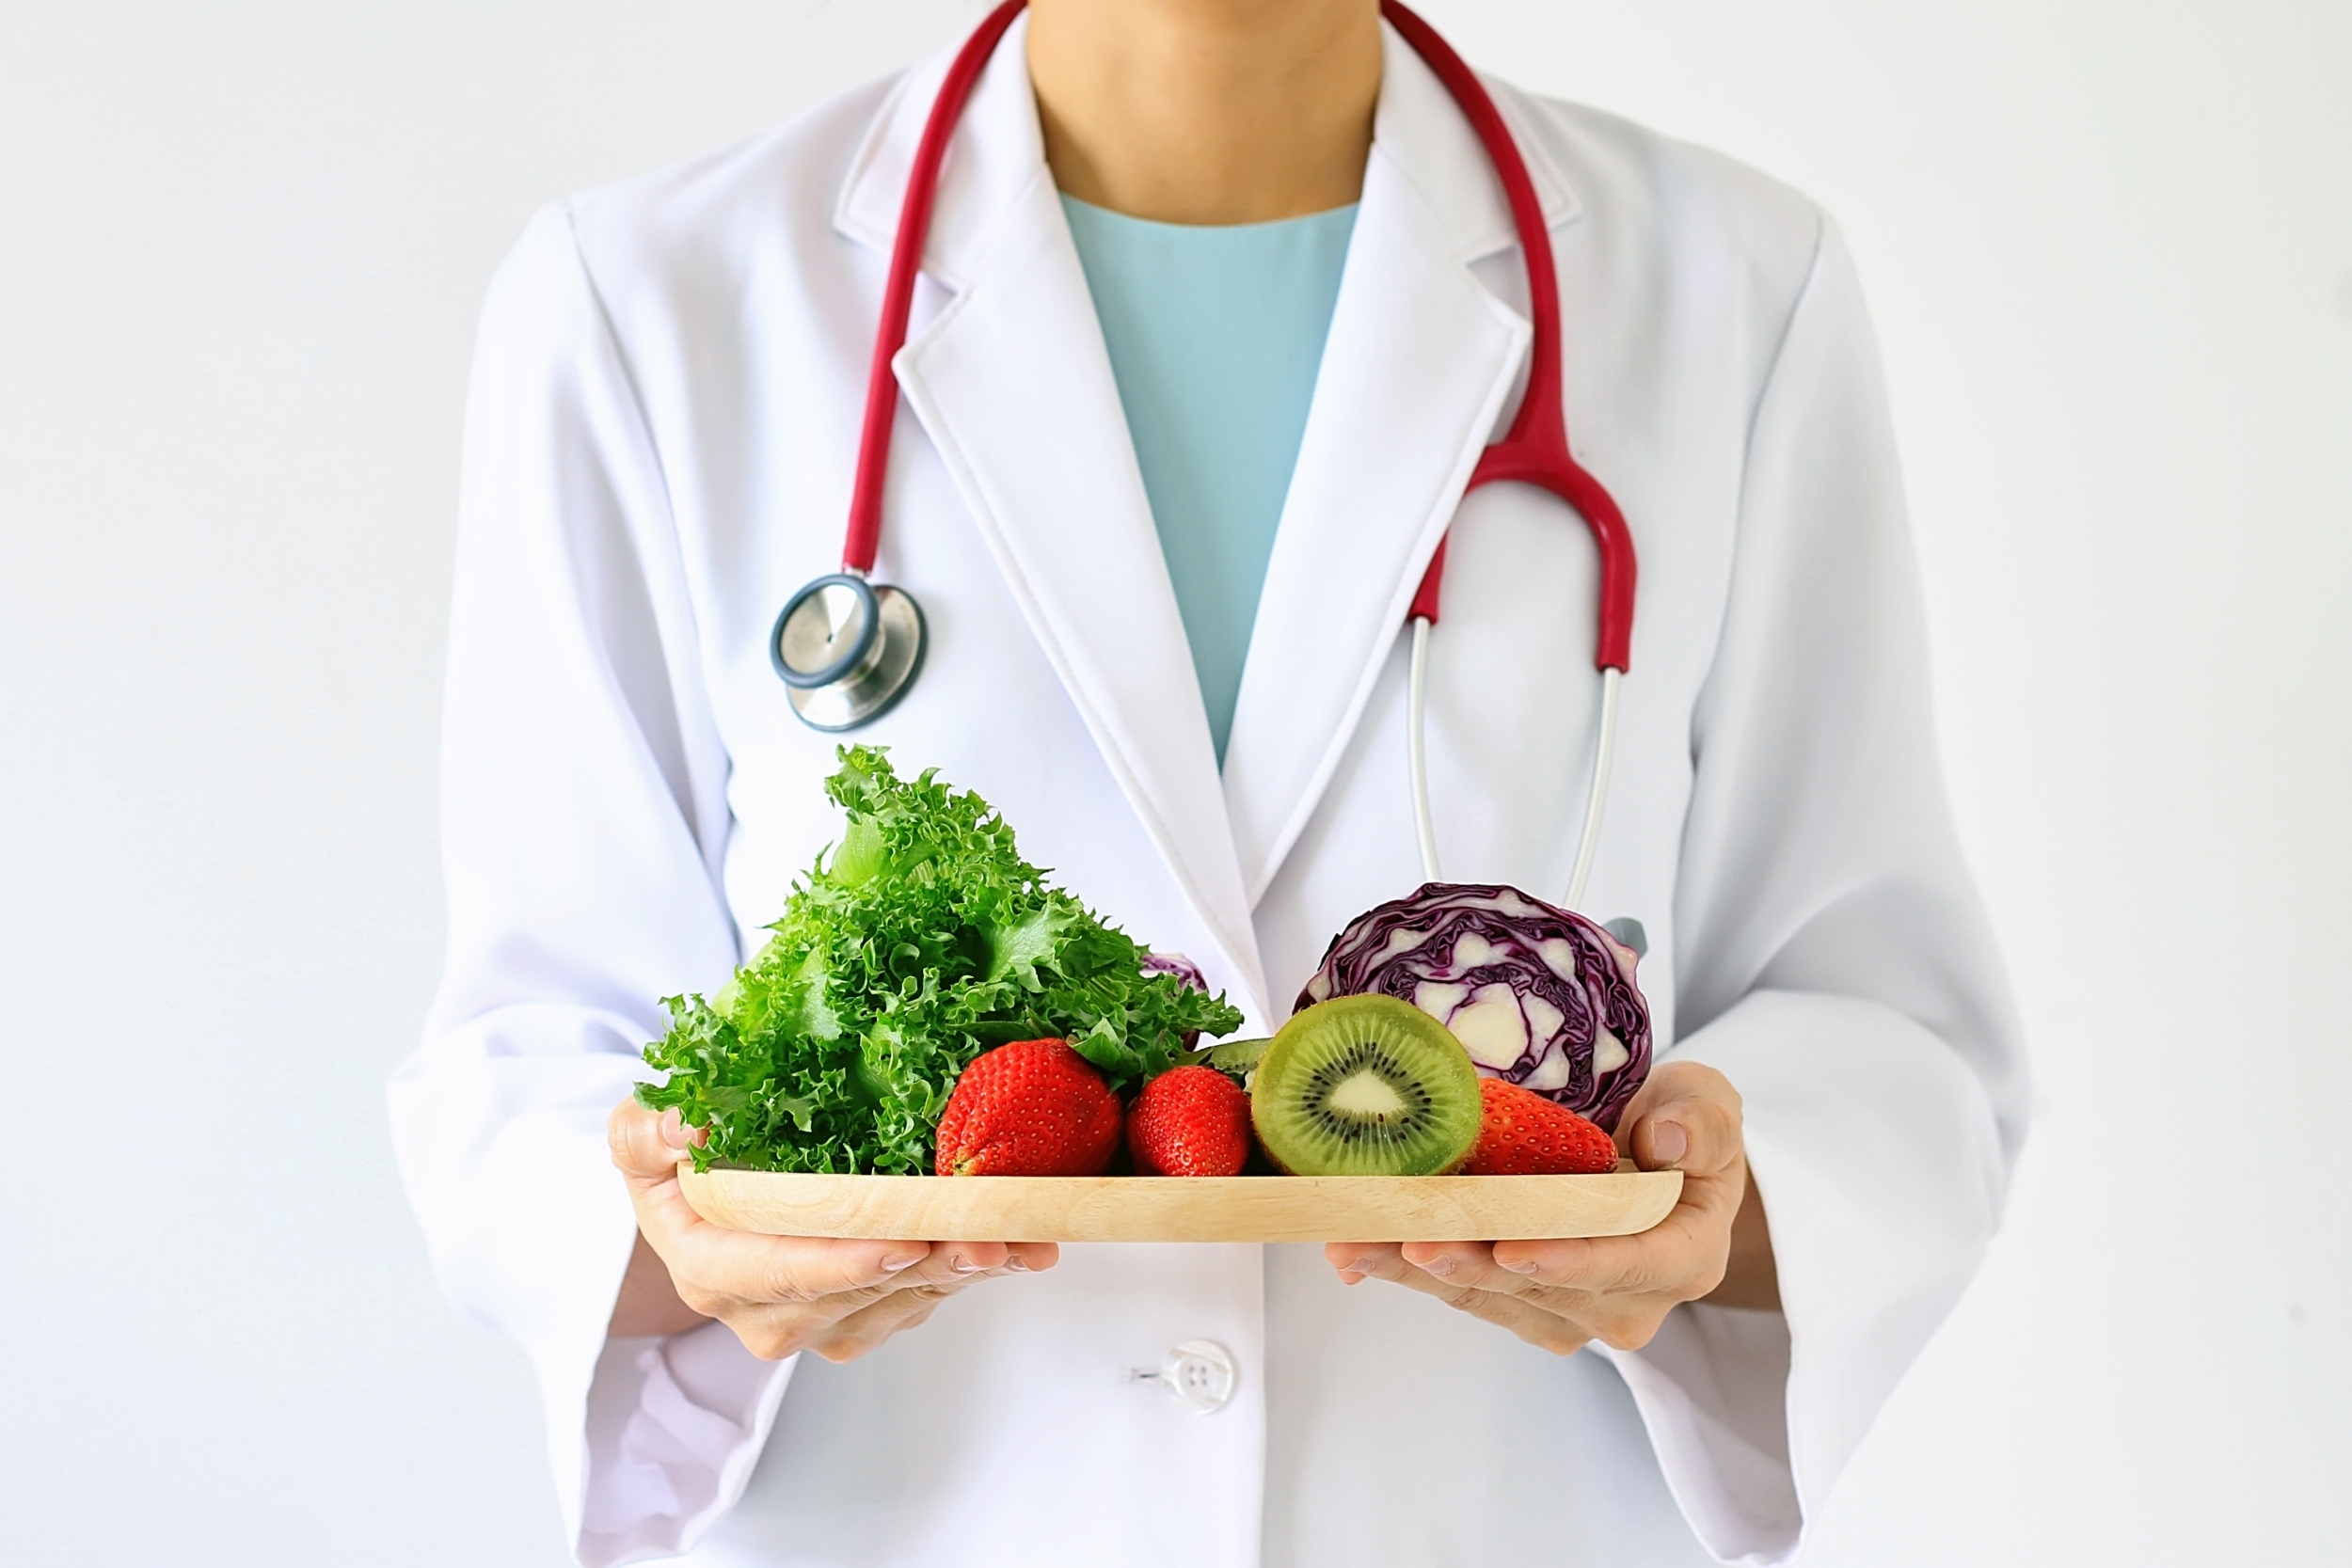 Doctor holding a plate of fruits and vegetables.